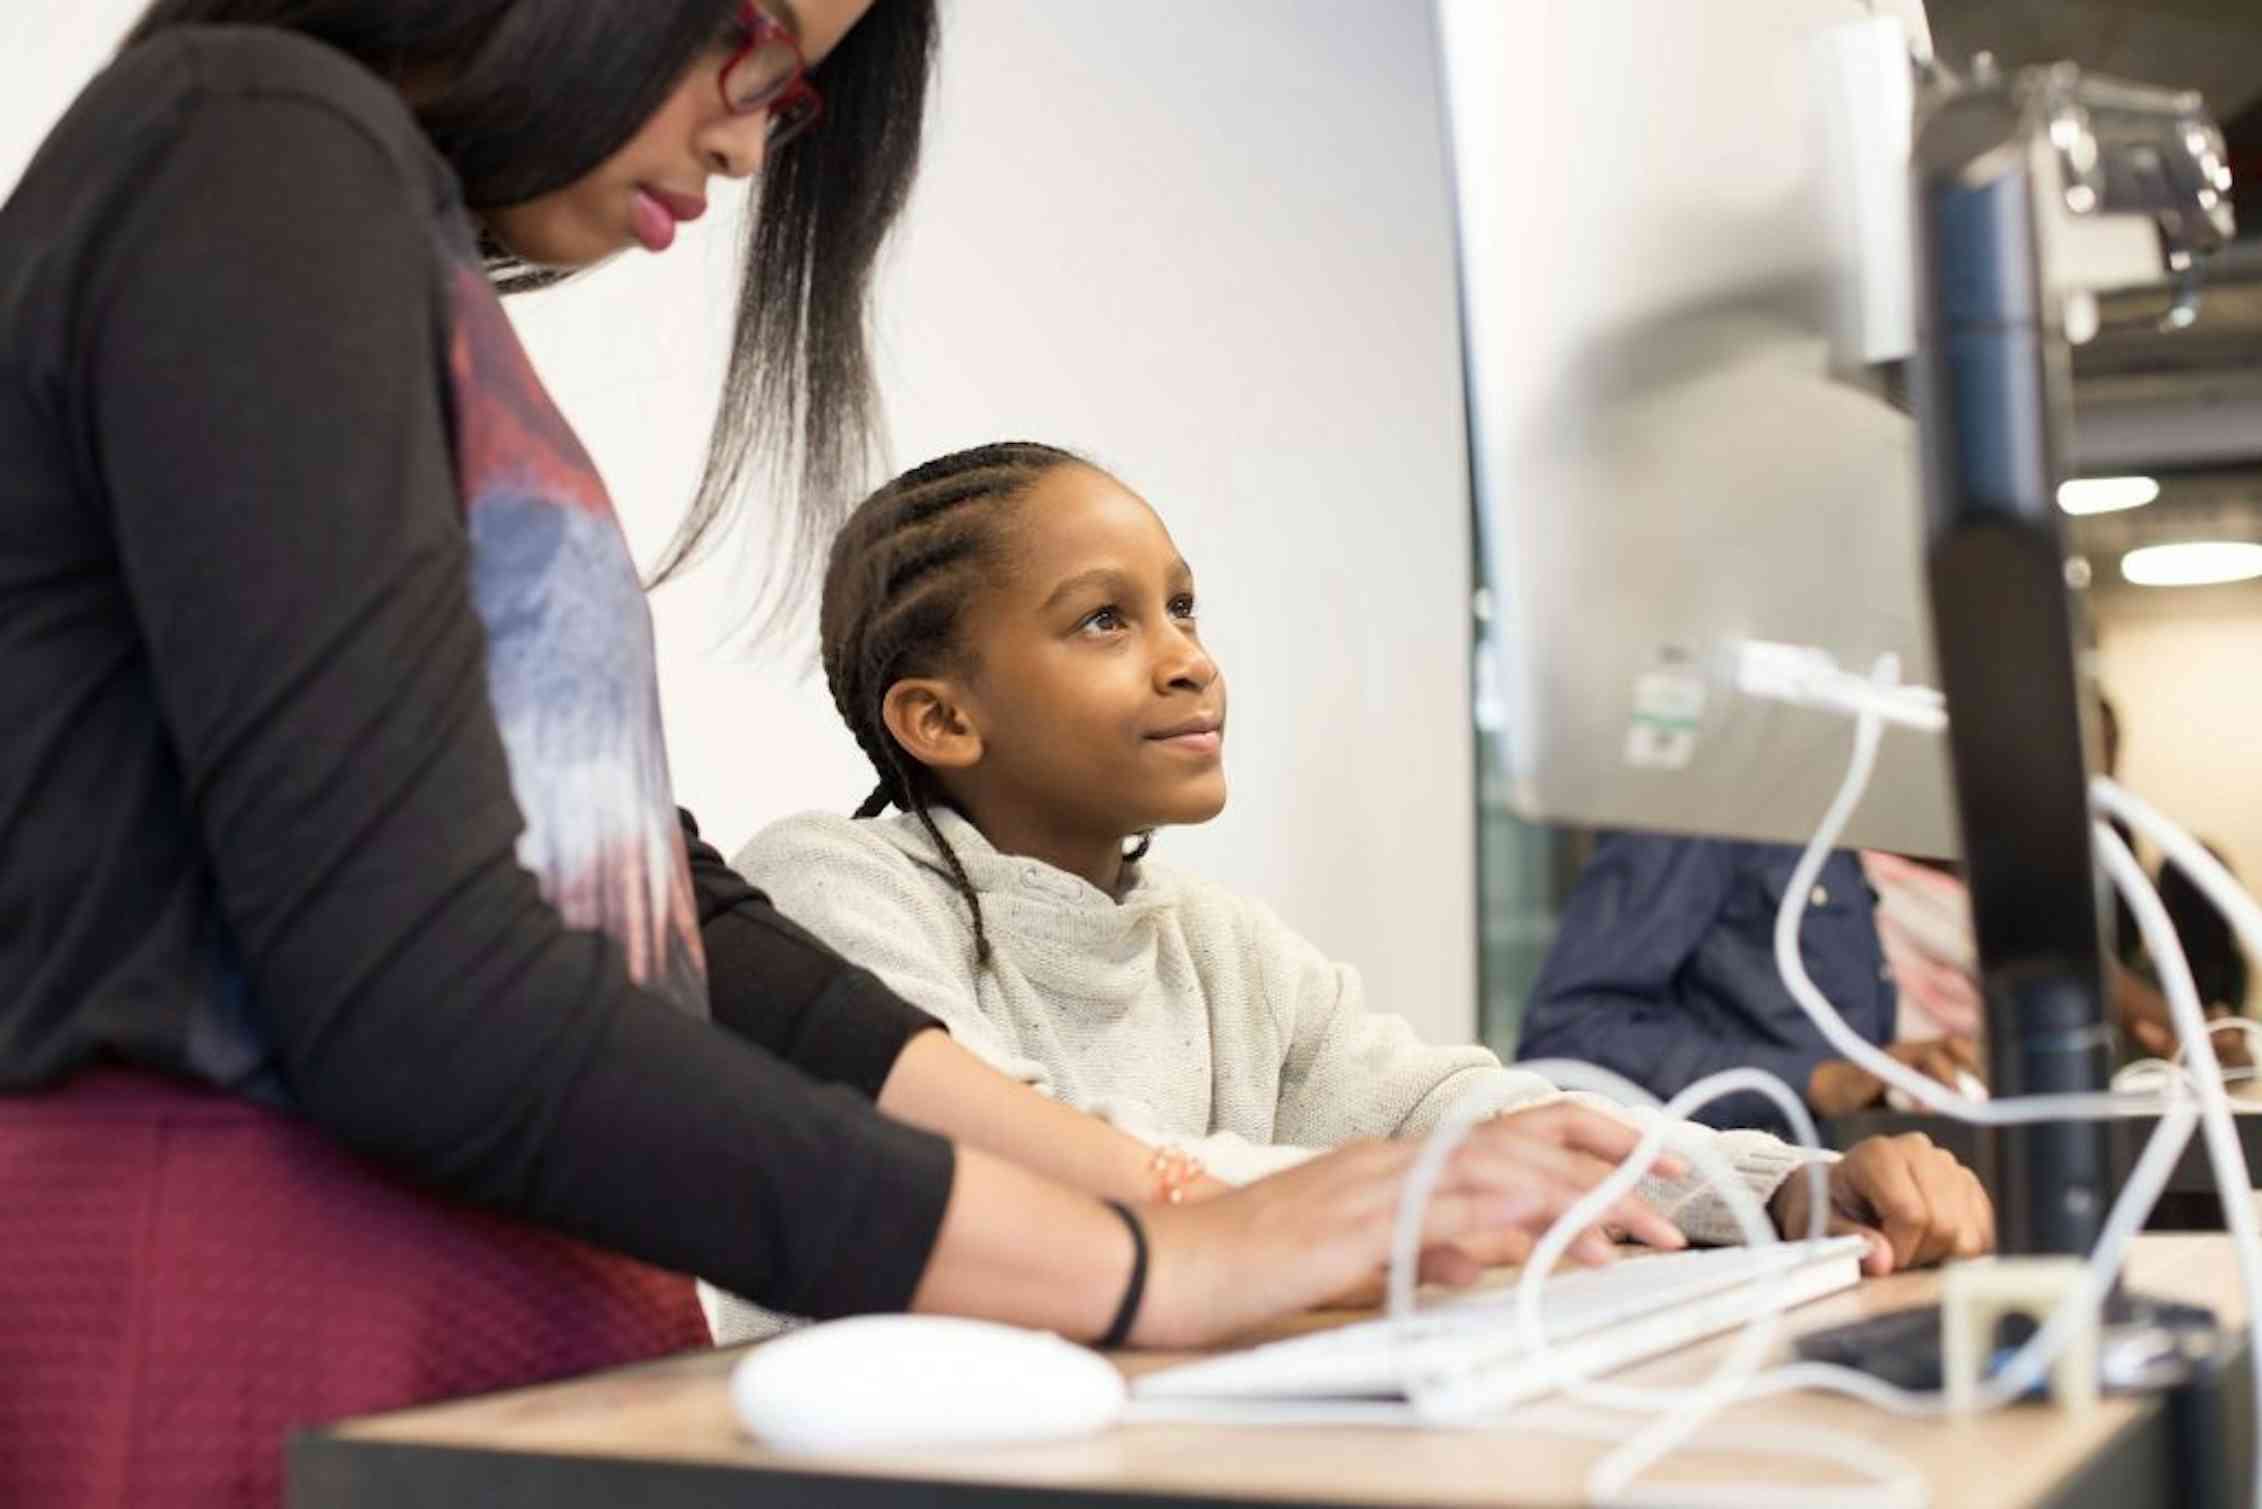 A Black boy works at a computer assisted by a Black teacher.